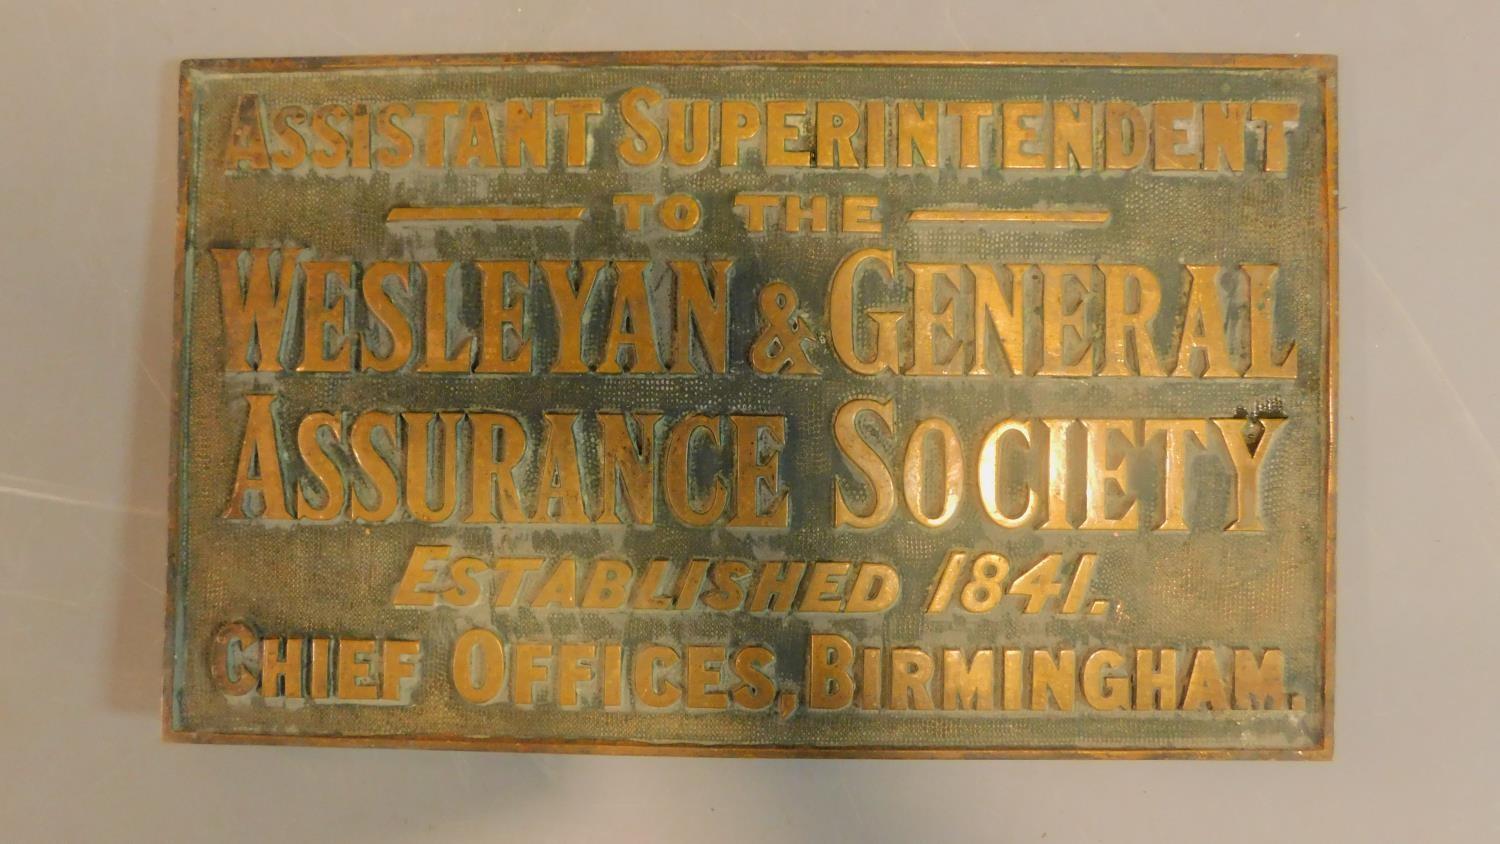 A collection of three brass wall plates for the Weslyan and General Assurance society. - Image 4 of 4